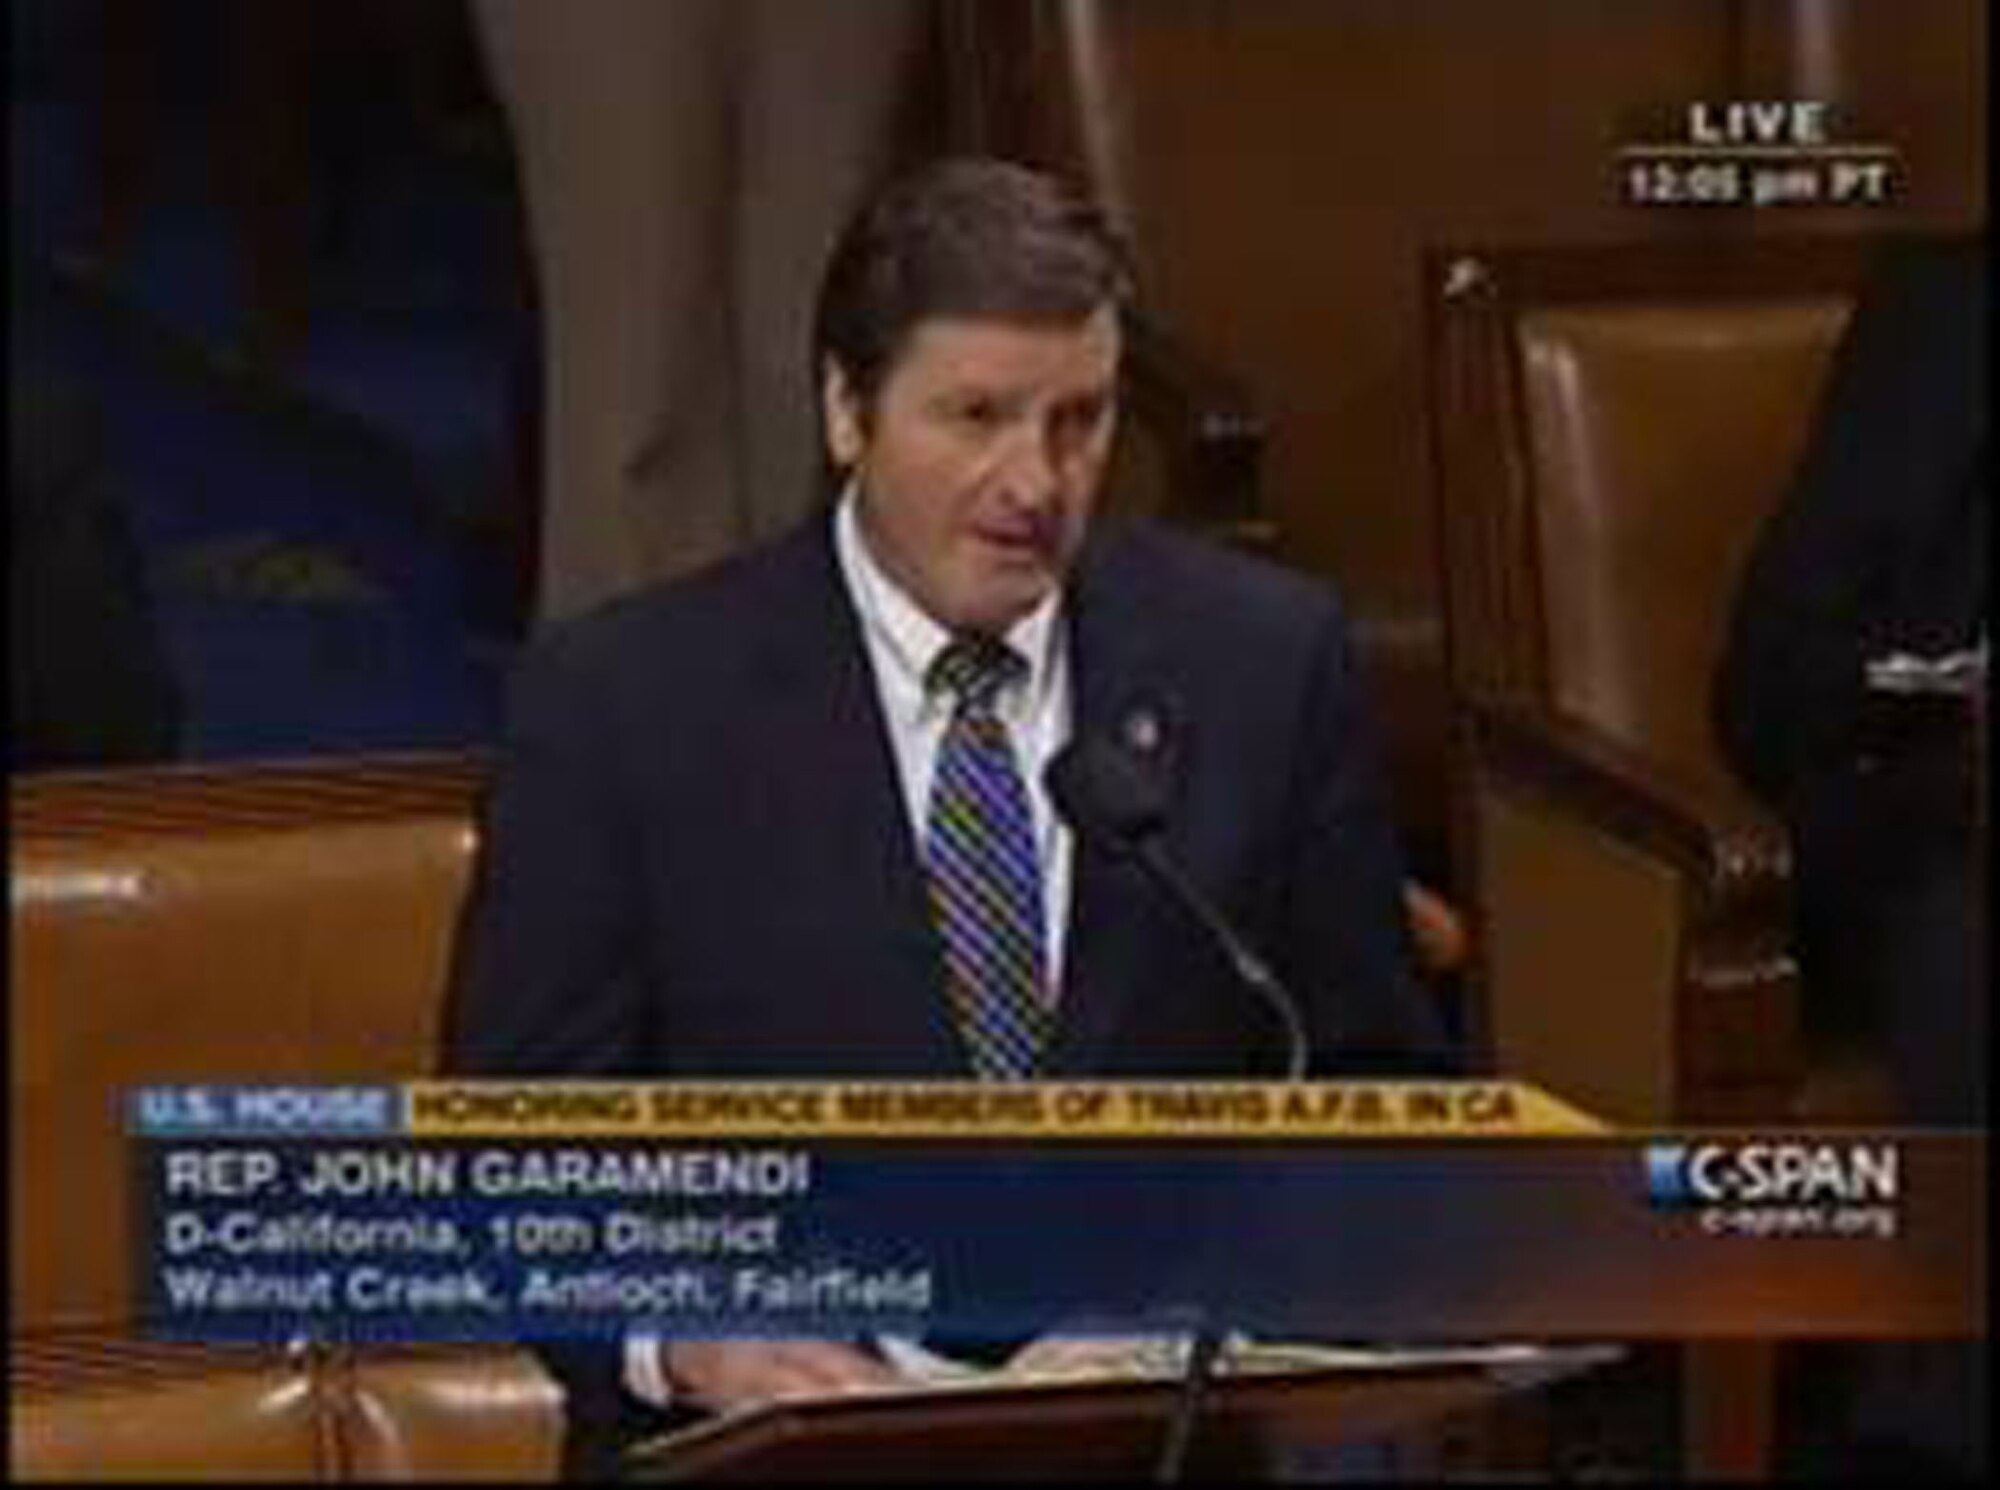 TRAVIS AIR FORCE BASE, Calif. -- Congressman John Garamendi (D-Walnut Creek, CA), a member of the House Armed Services Committee, is pleased to announce that House Resolution 1585, his resolution honoring the people of Travis Air Force Base, passed the House of Representatives by an 408-0 vote. Garamendi is proud to represent Travis in Congress. (courtesy photo) 

